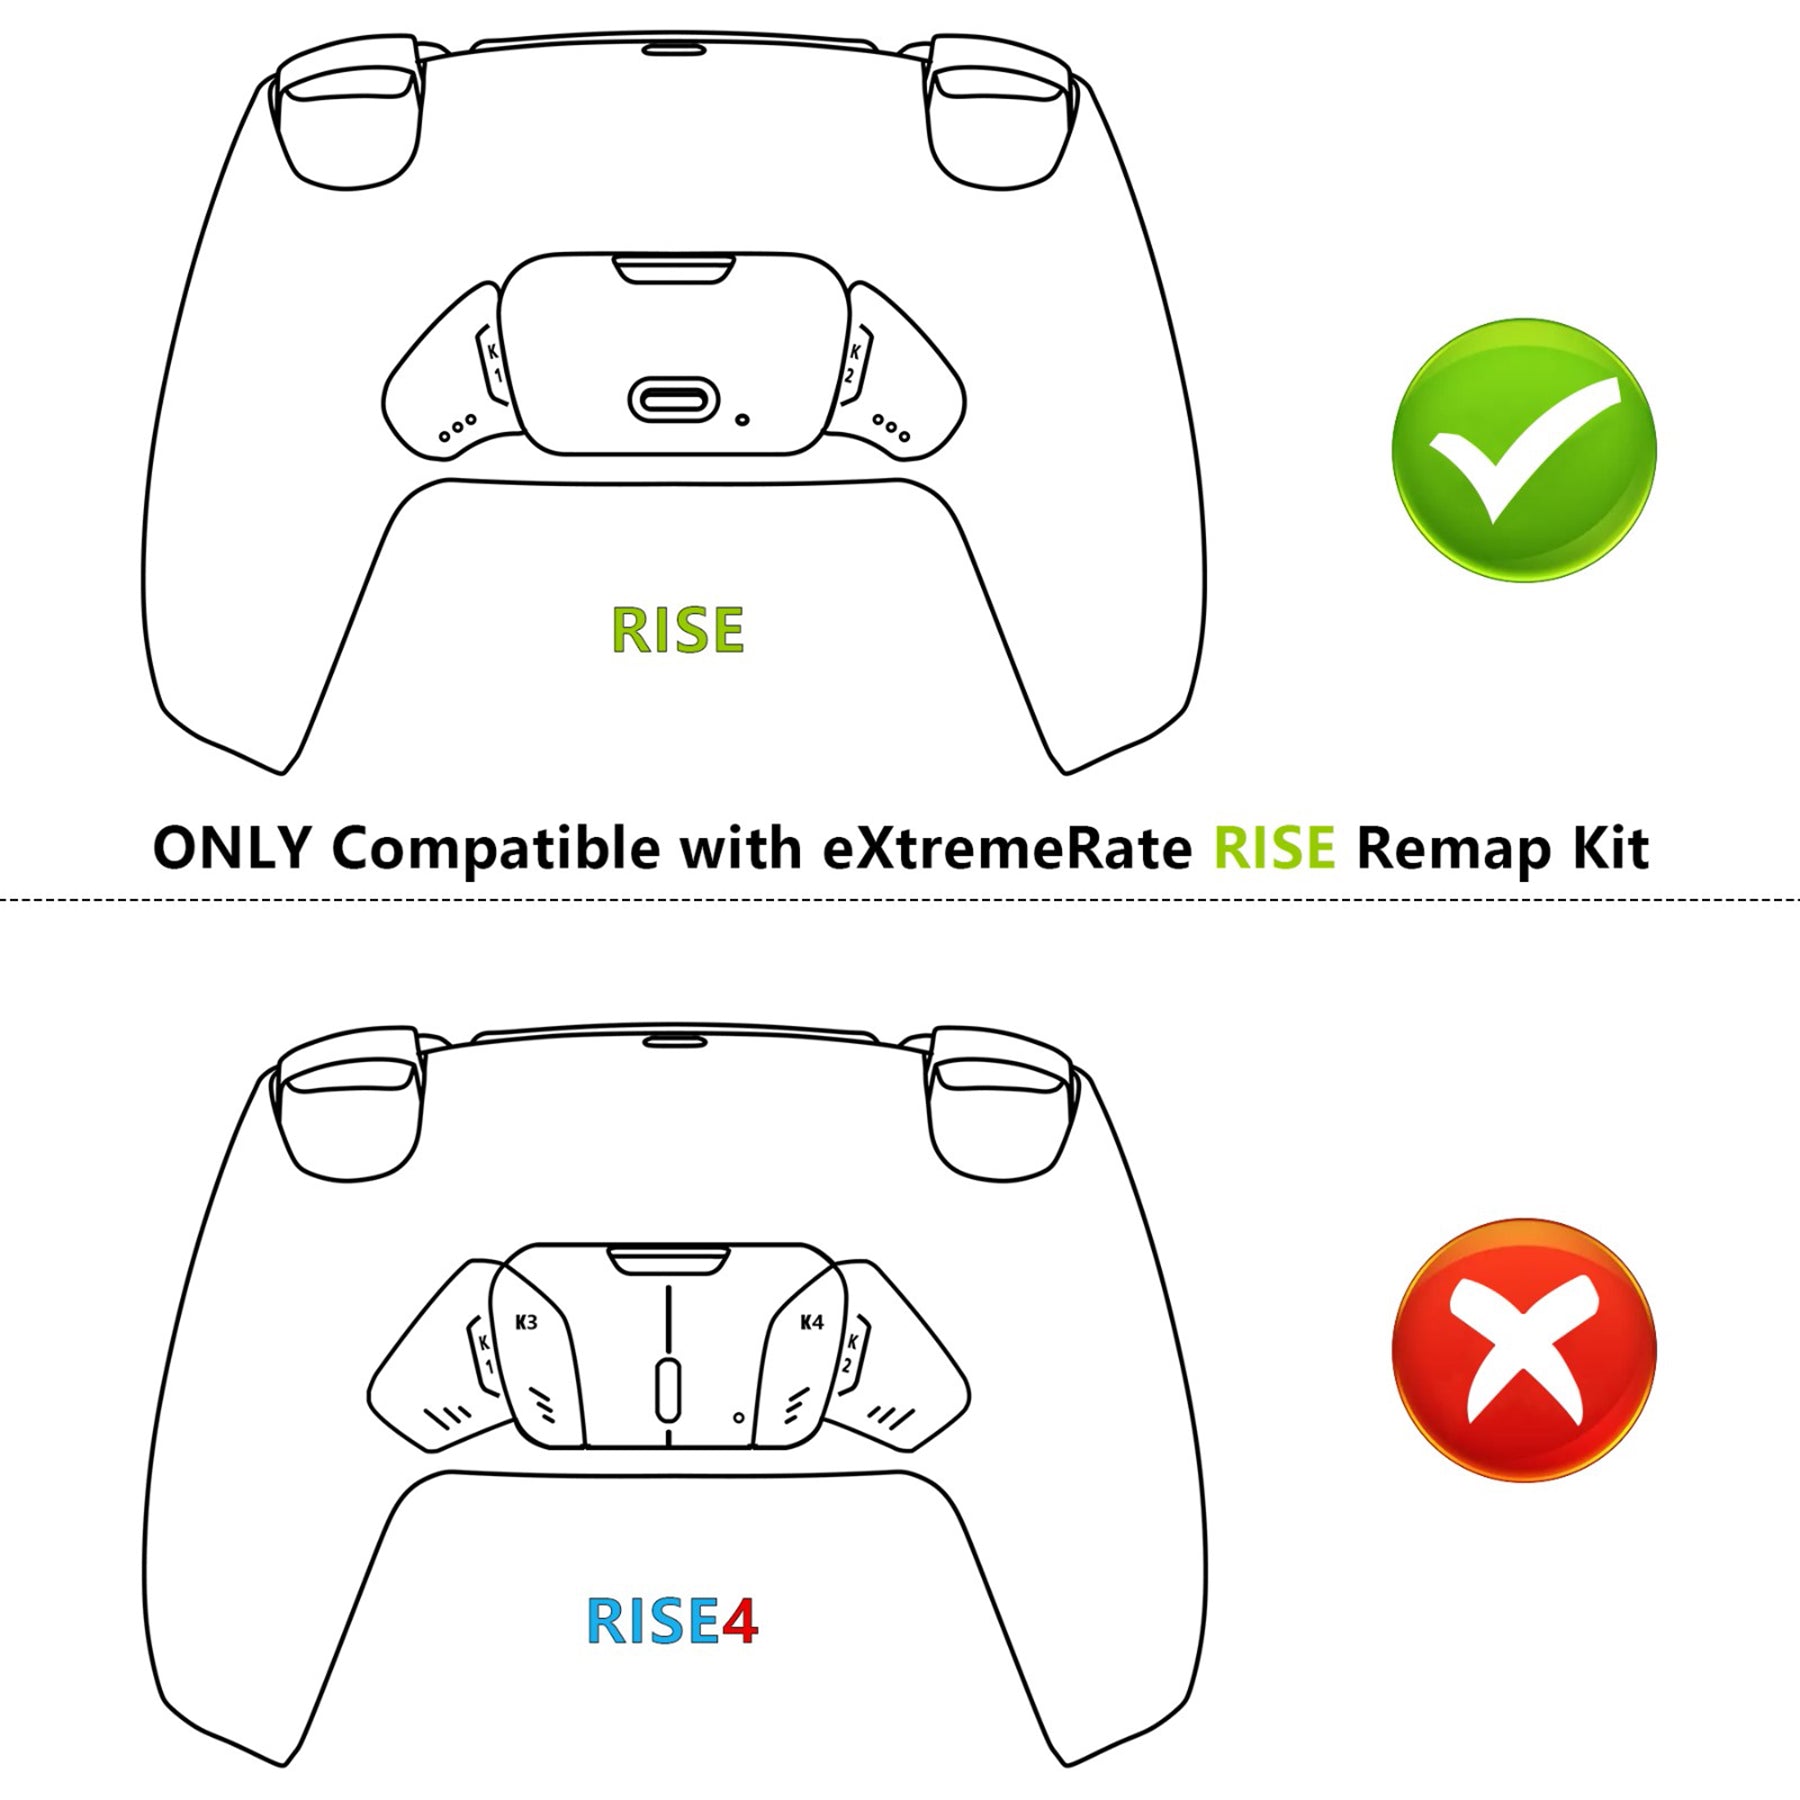 eXtremeRate Replacement Redesigned K1 K2 Back Buttons for eXtremerate RISE Remap Kit, Compatible with PS5 Controller - Chrome Blue eXtremeRate